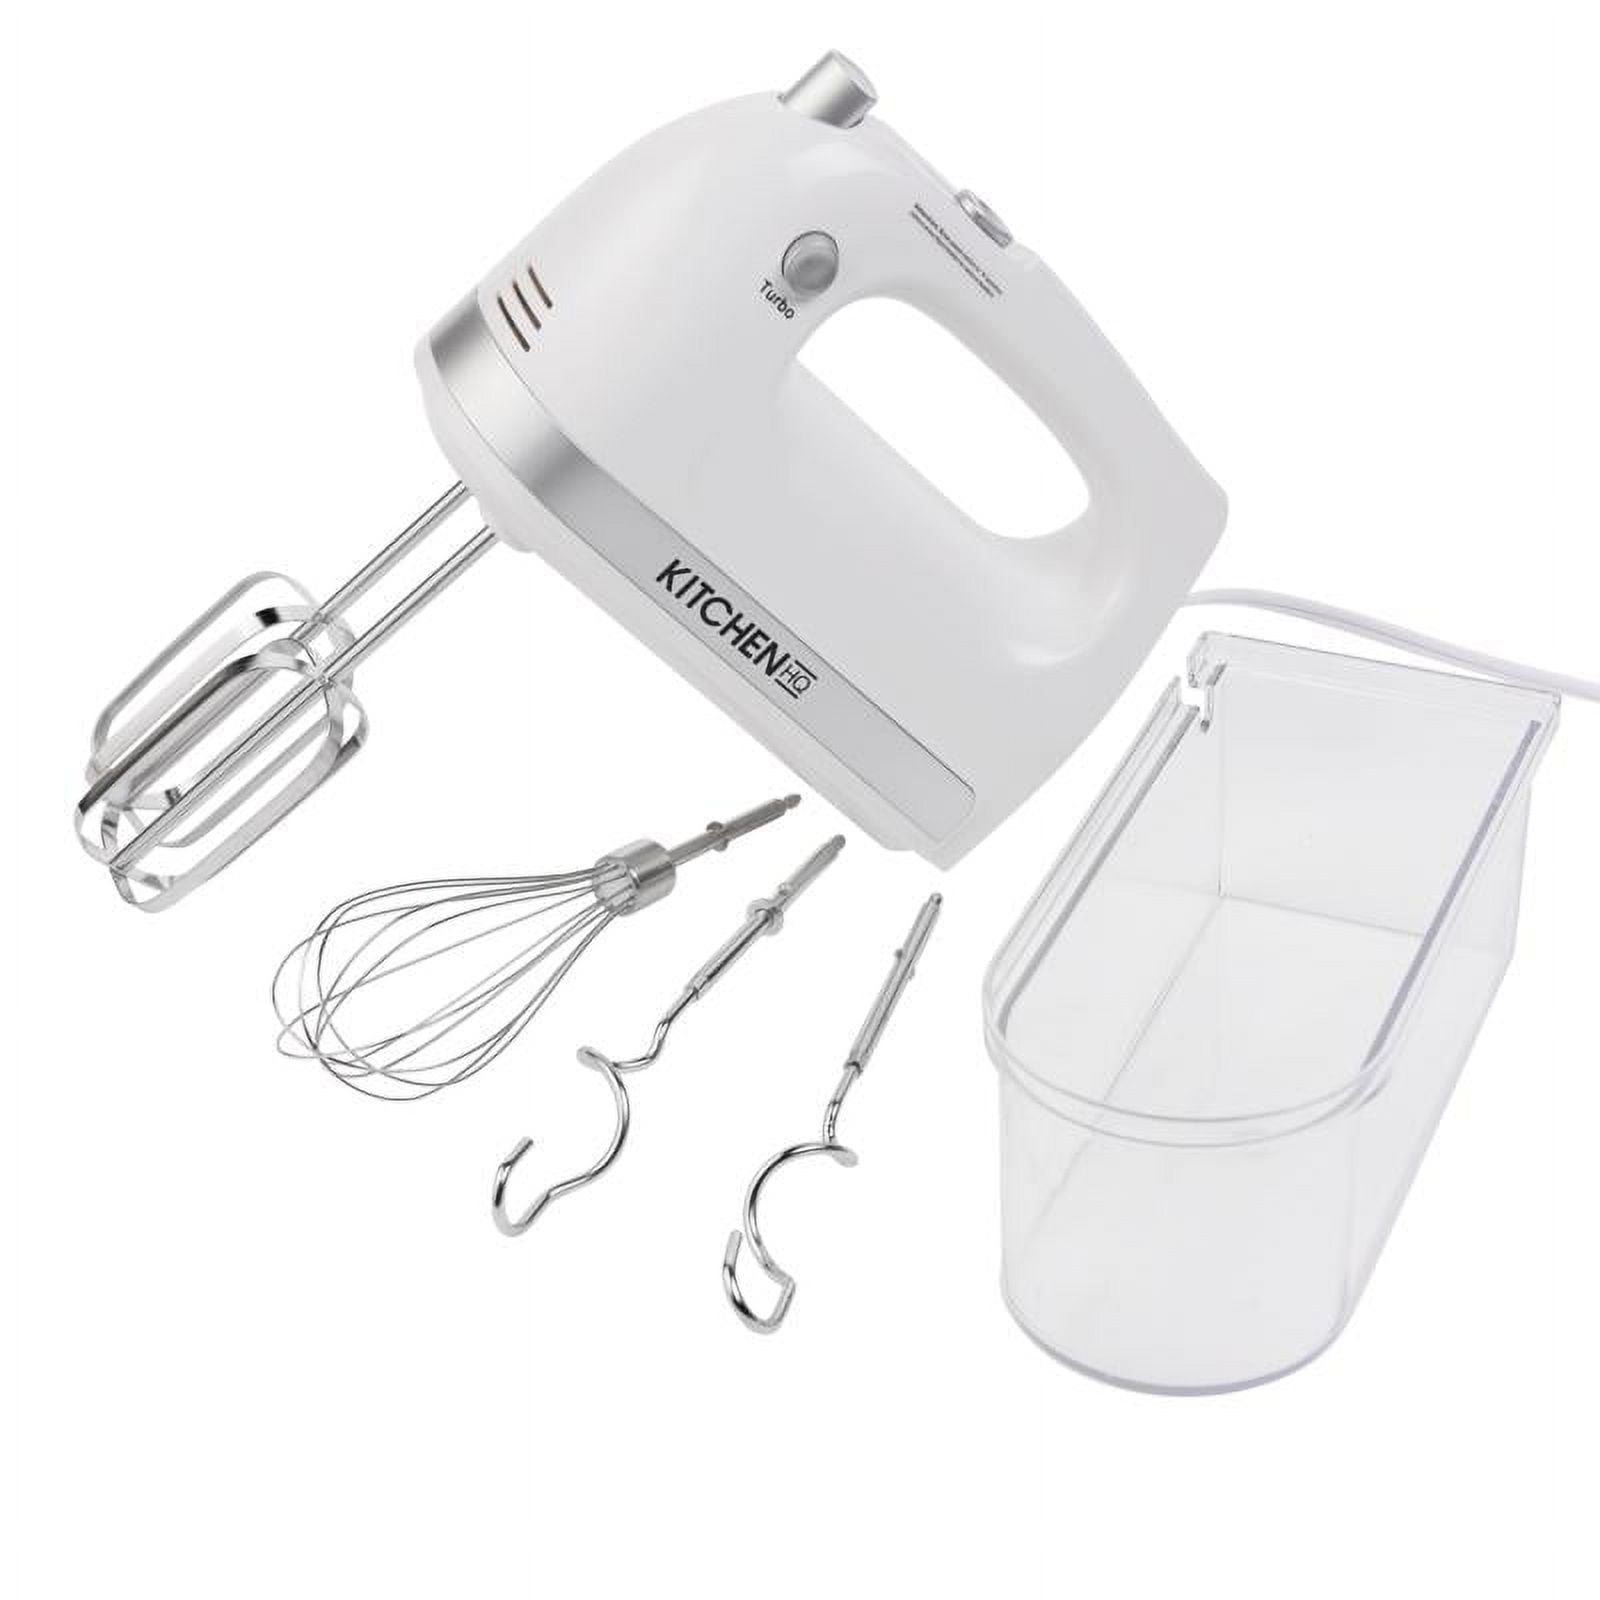 Hand Mixer Electric, 450W Kitchen Mixers with Scale Cup Storage Case, Turbo  Boos